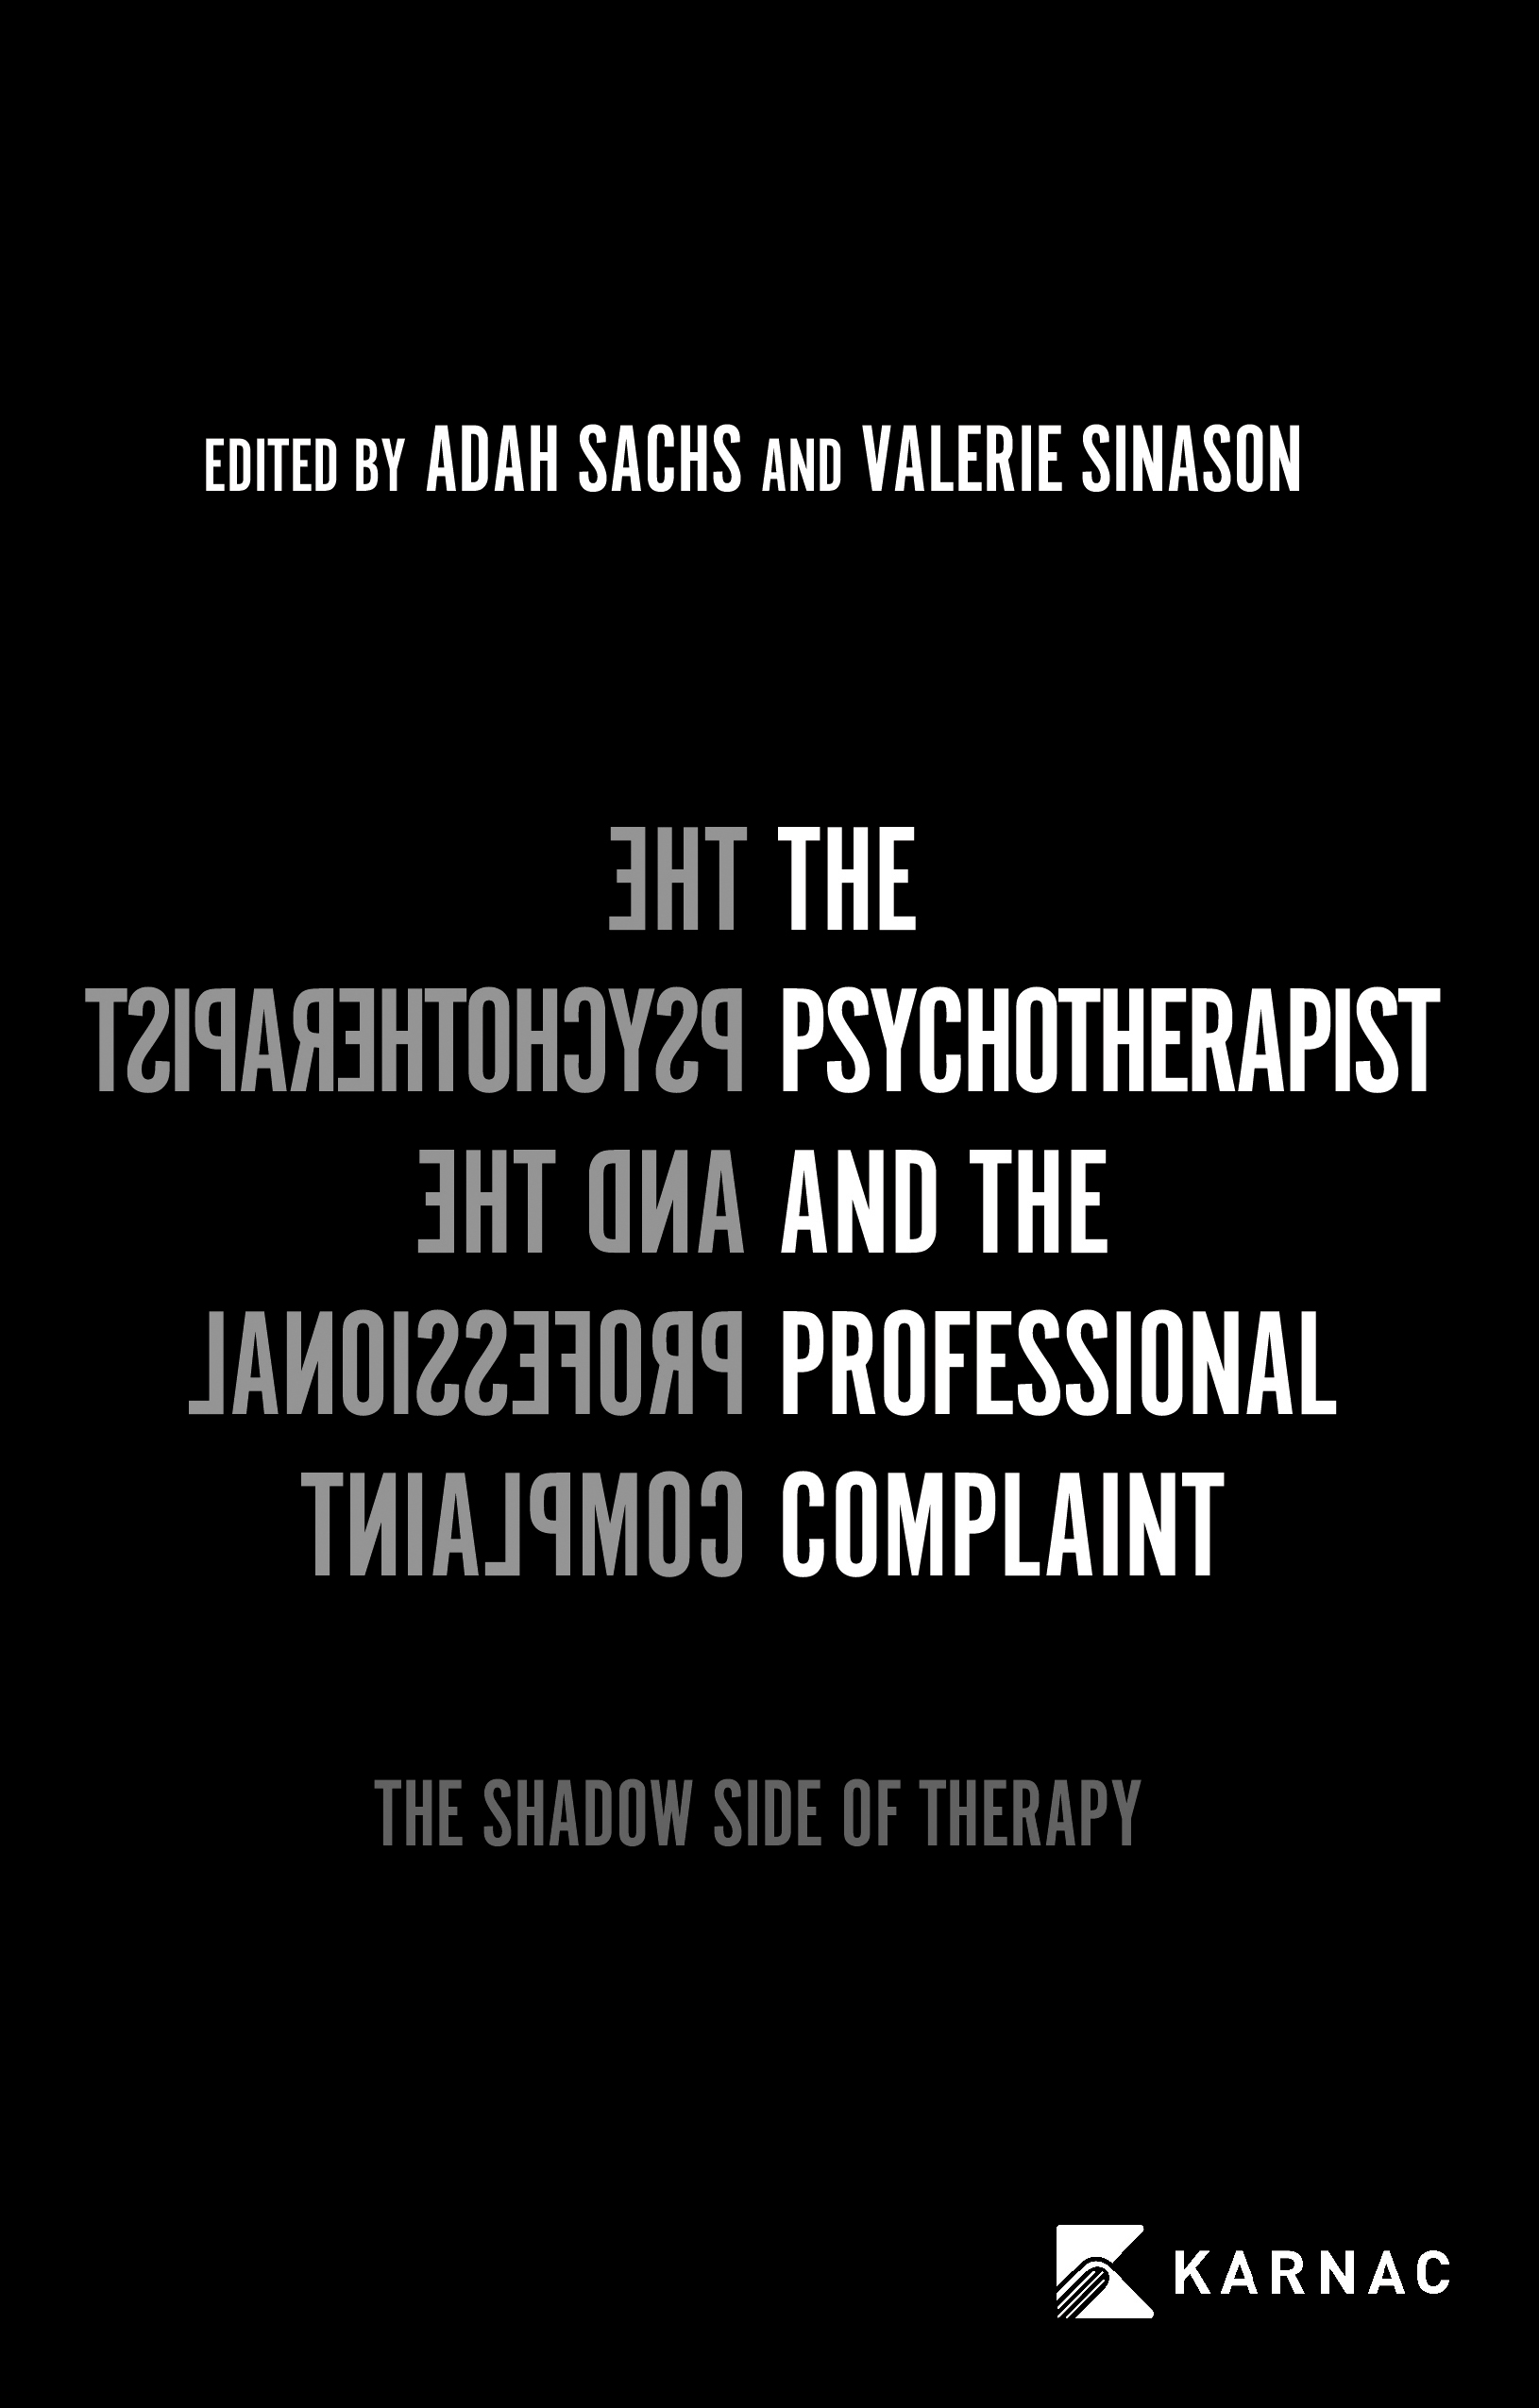 The Psychotherapist and the Professional Complaint: The Shadow Side of Psychotherapy